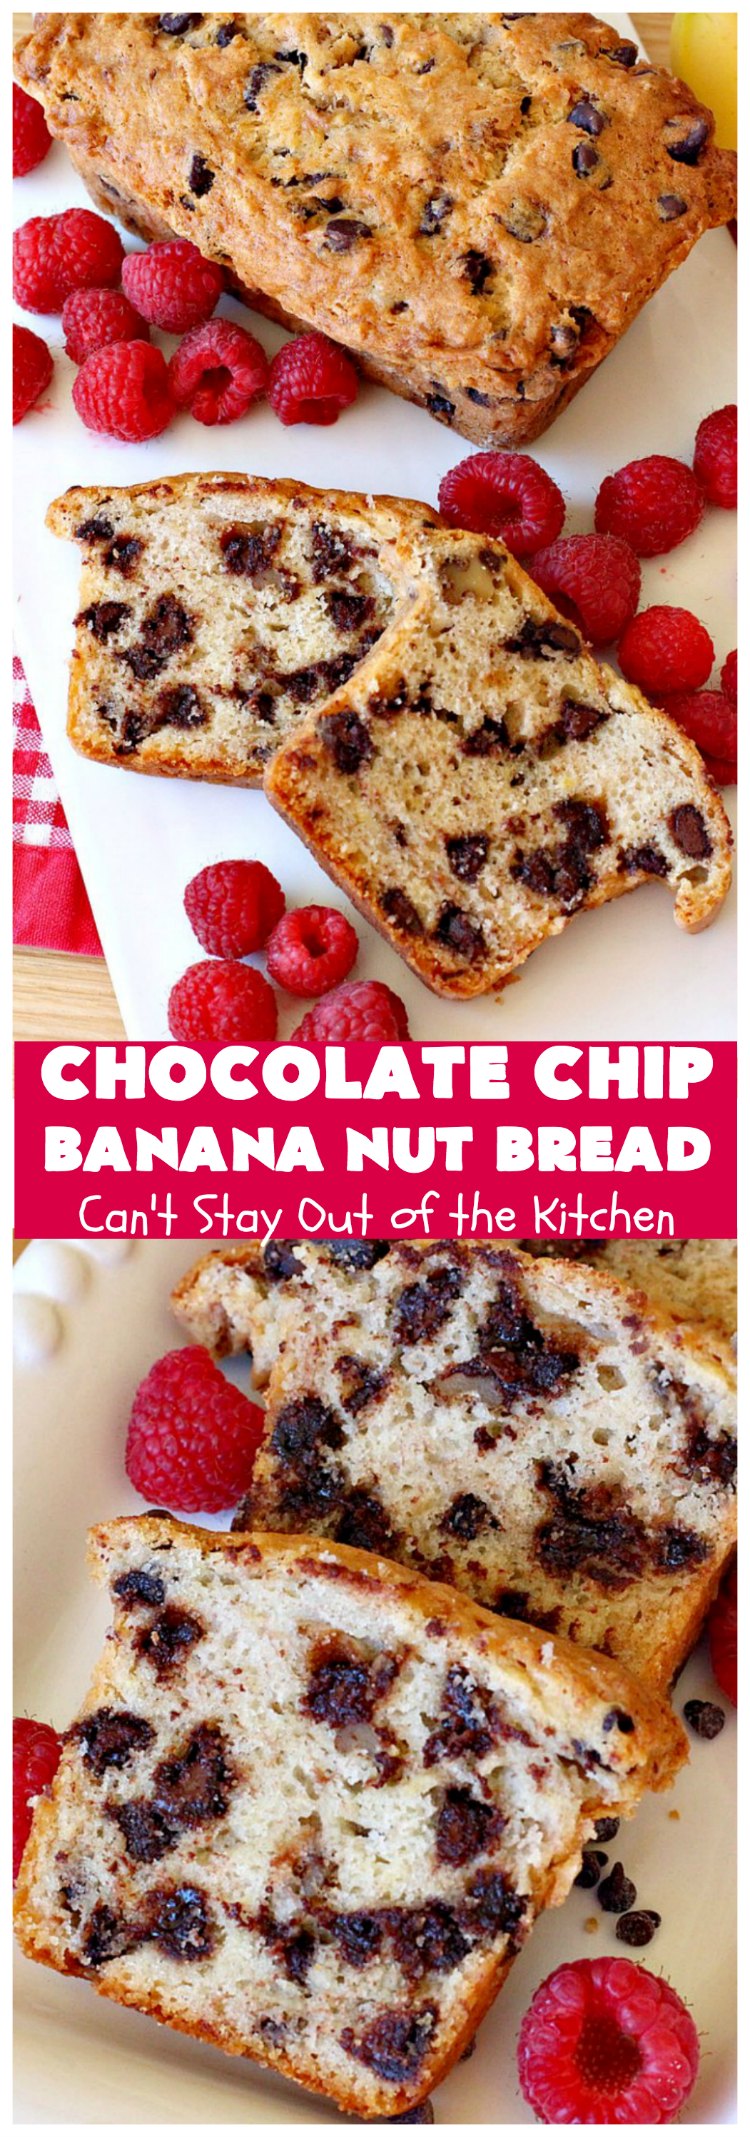 Chocolate Chip Banana Nut Bread | Can't Stay Out of the Kitchen